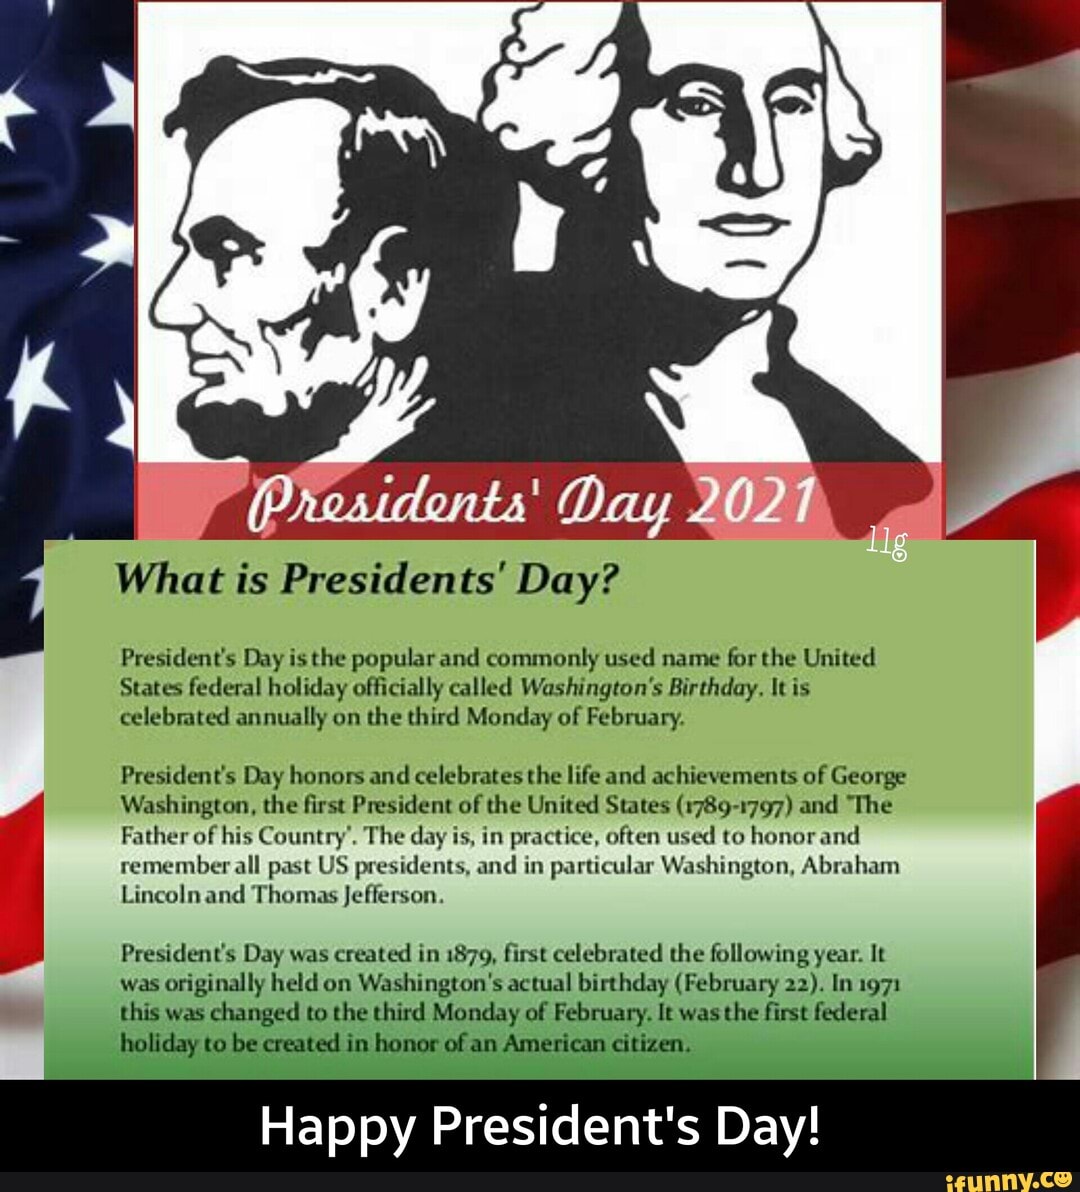 What is Presidents' Day? President's Day is the popular and commonly